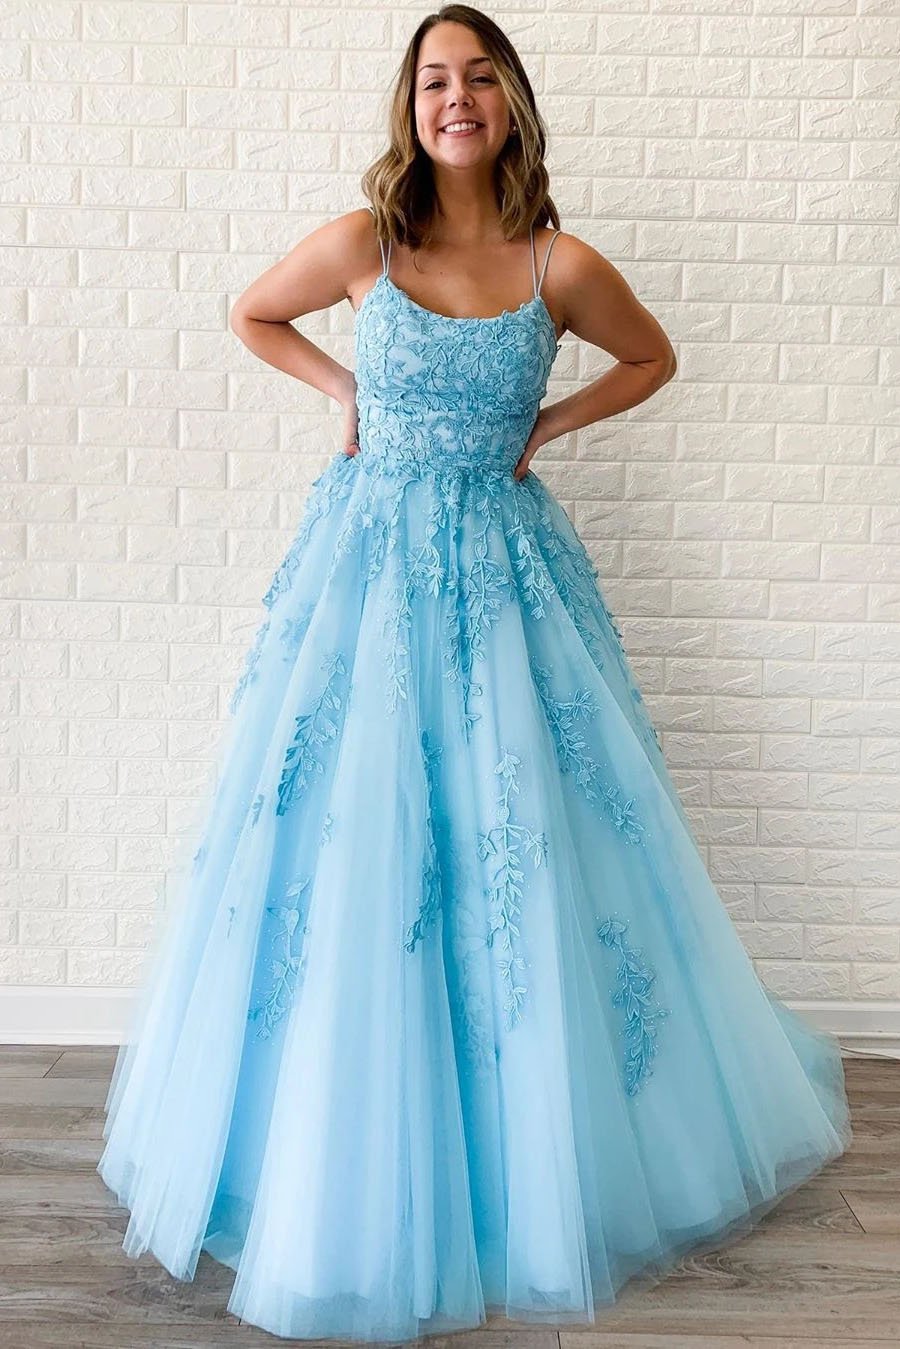 Unique A-Line Sky Blue Tulle Appliques Beads Scoop Prom Dresses with Lace STC20453